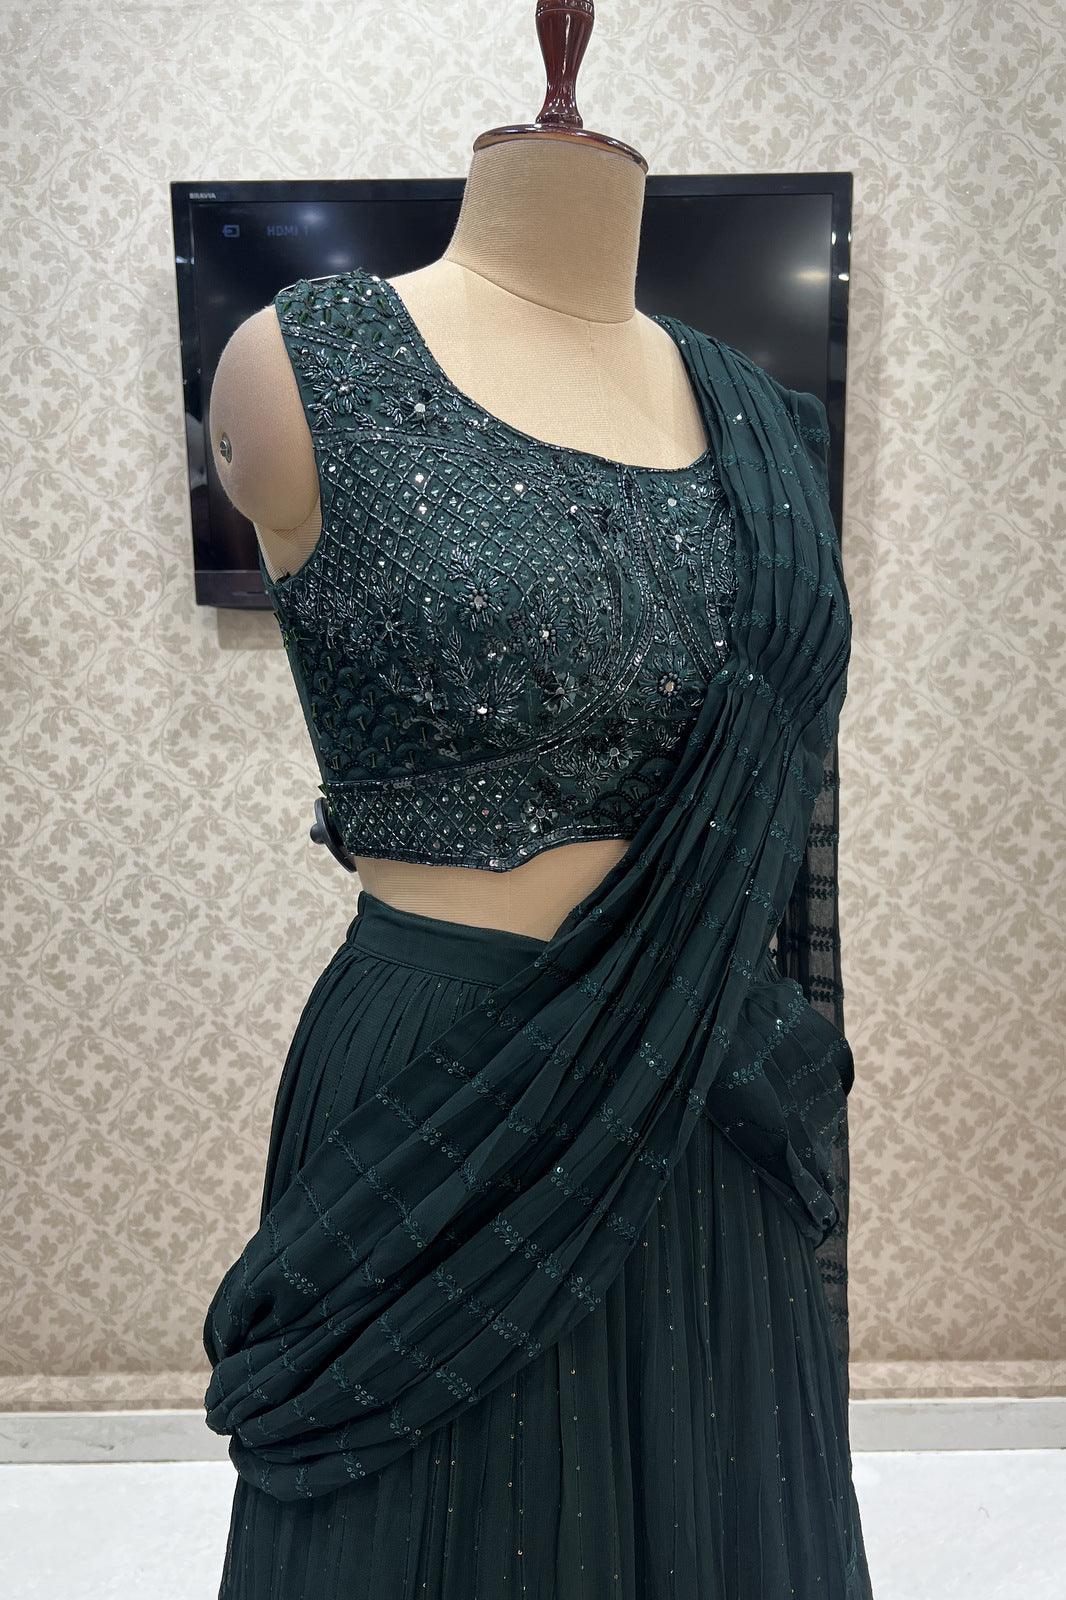 Bottle Green Readymade Saree and Readymade Sequins and Mirror work Designer Blouse - Seasons Chennai